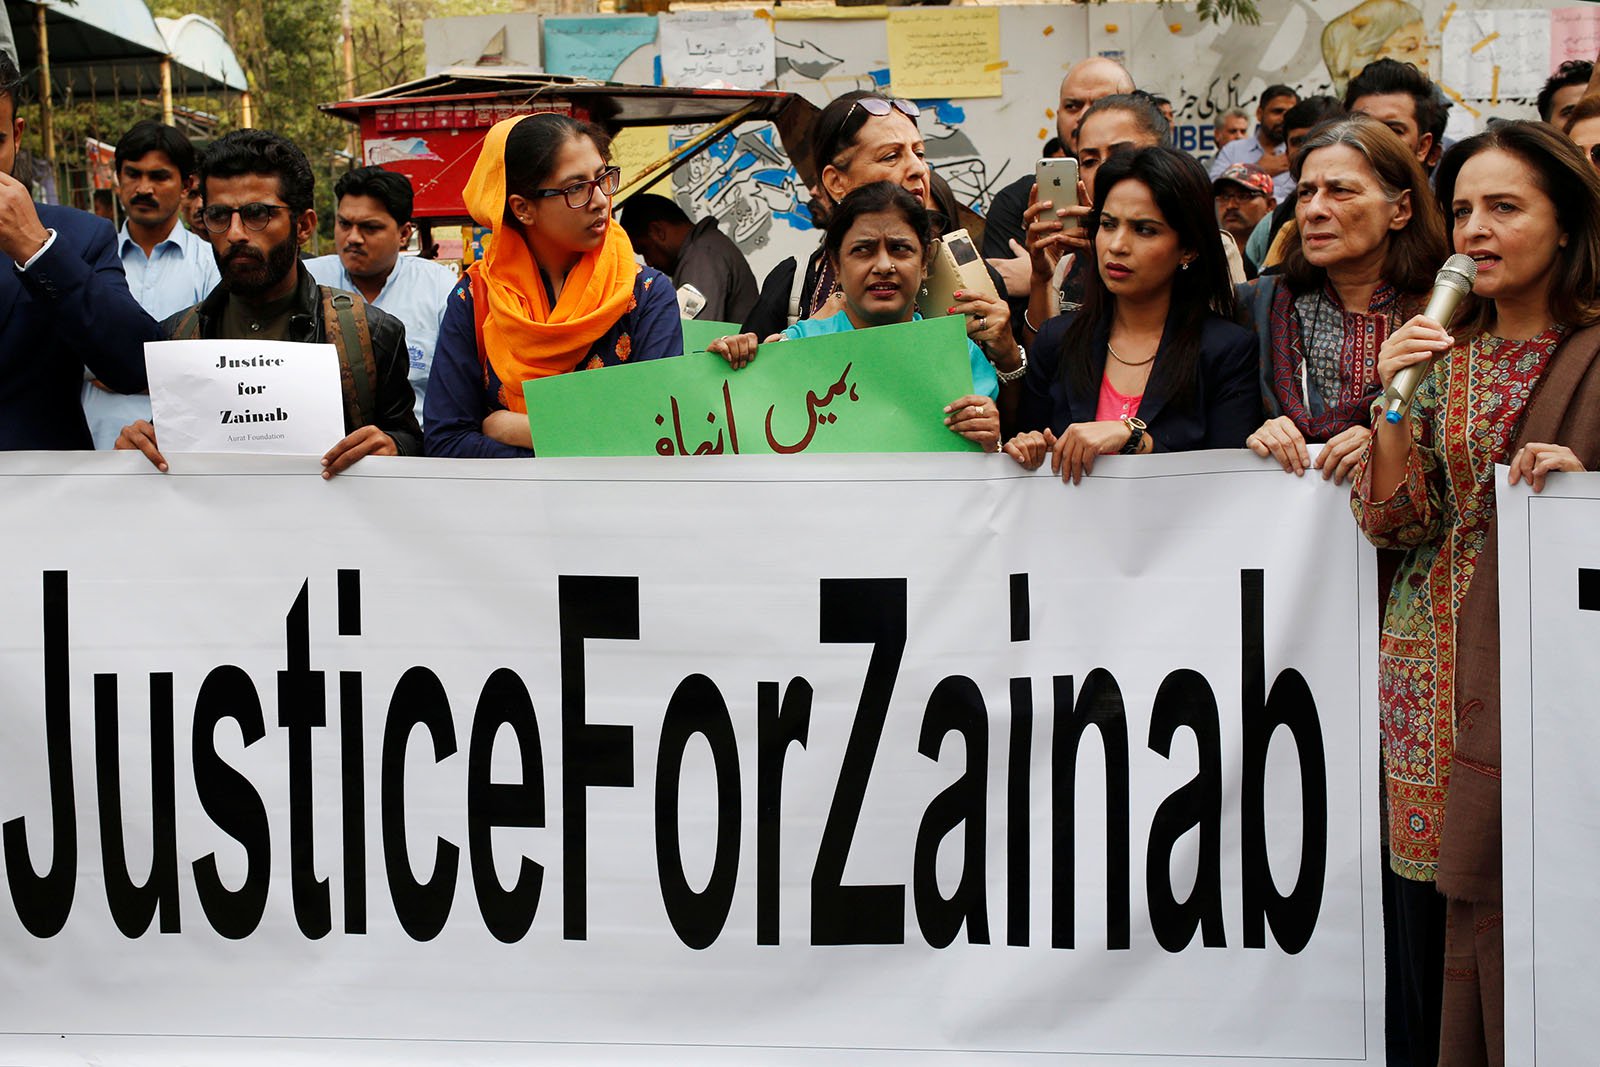 Justice for Zainab